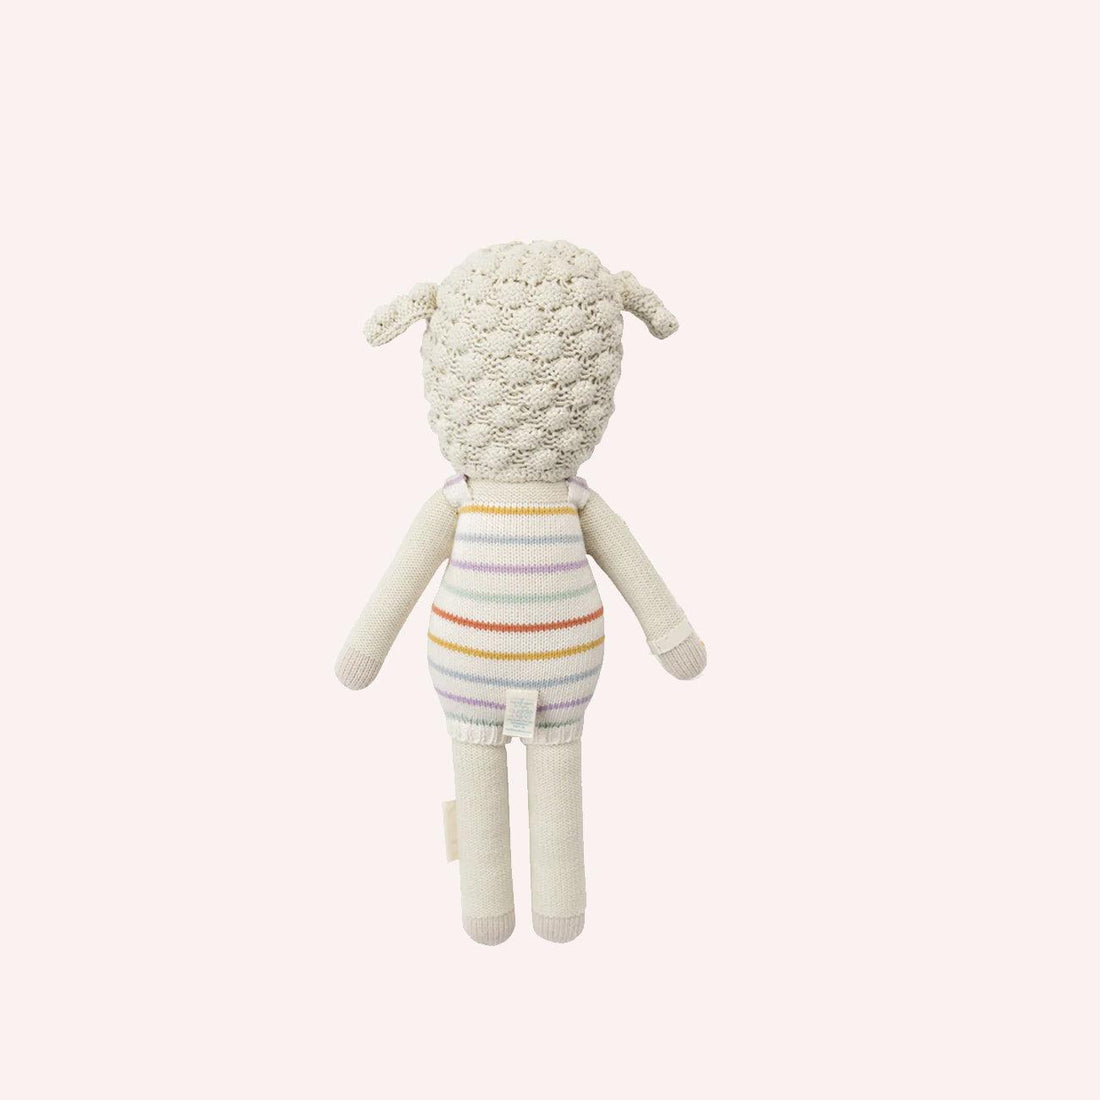 Little Hand Knitted Doll - Avery the Lamb